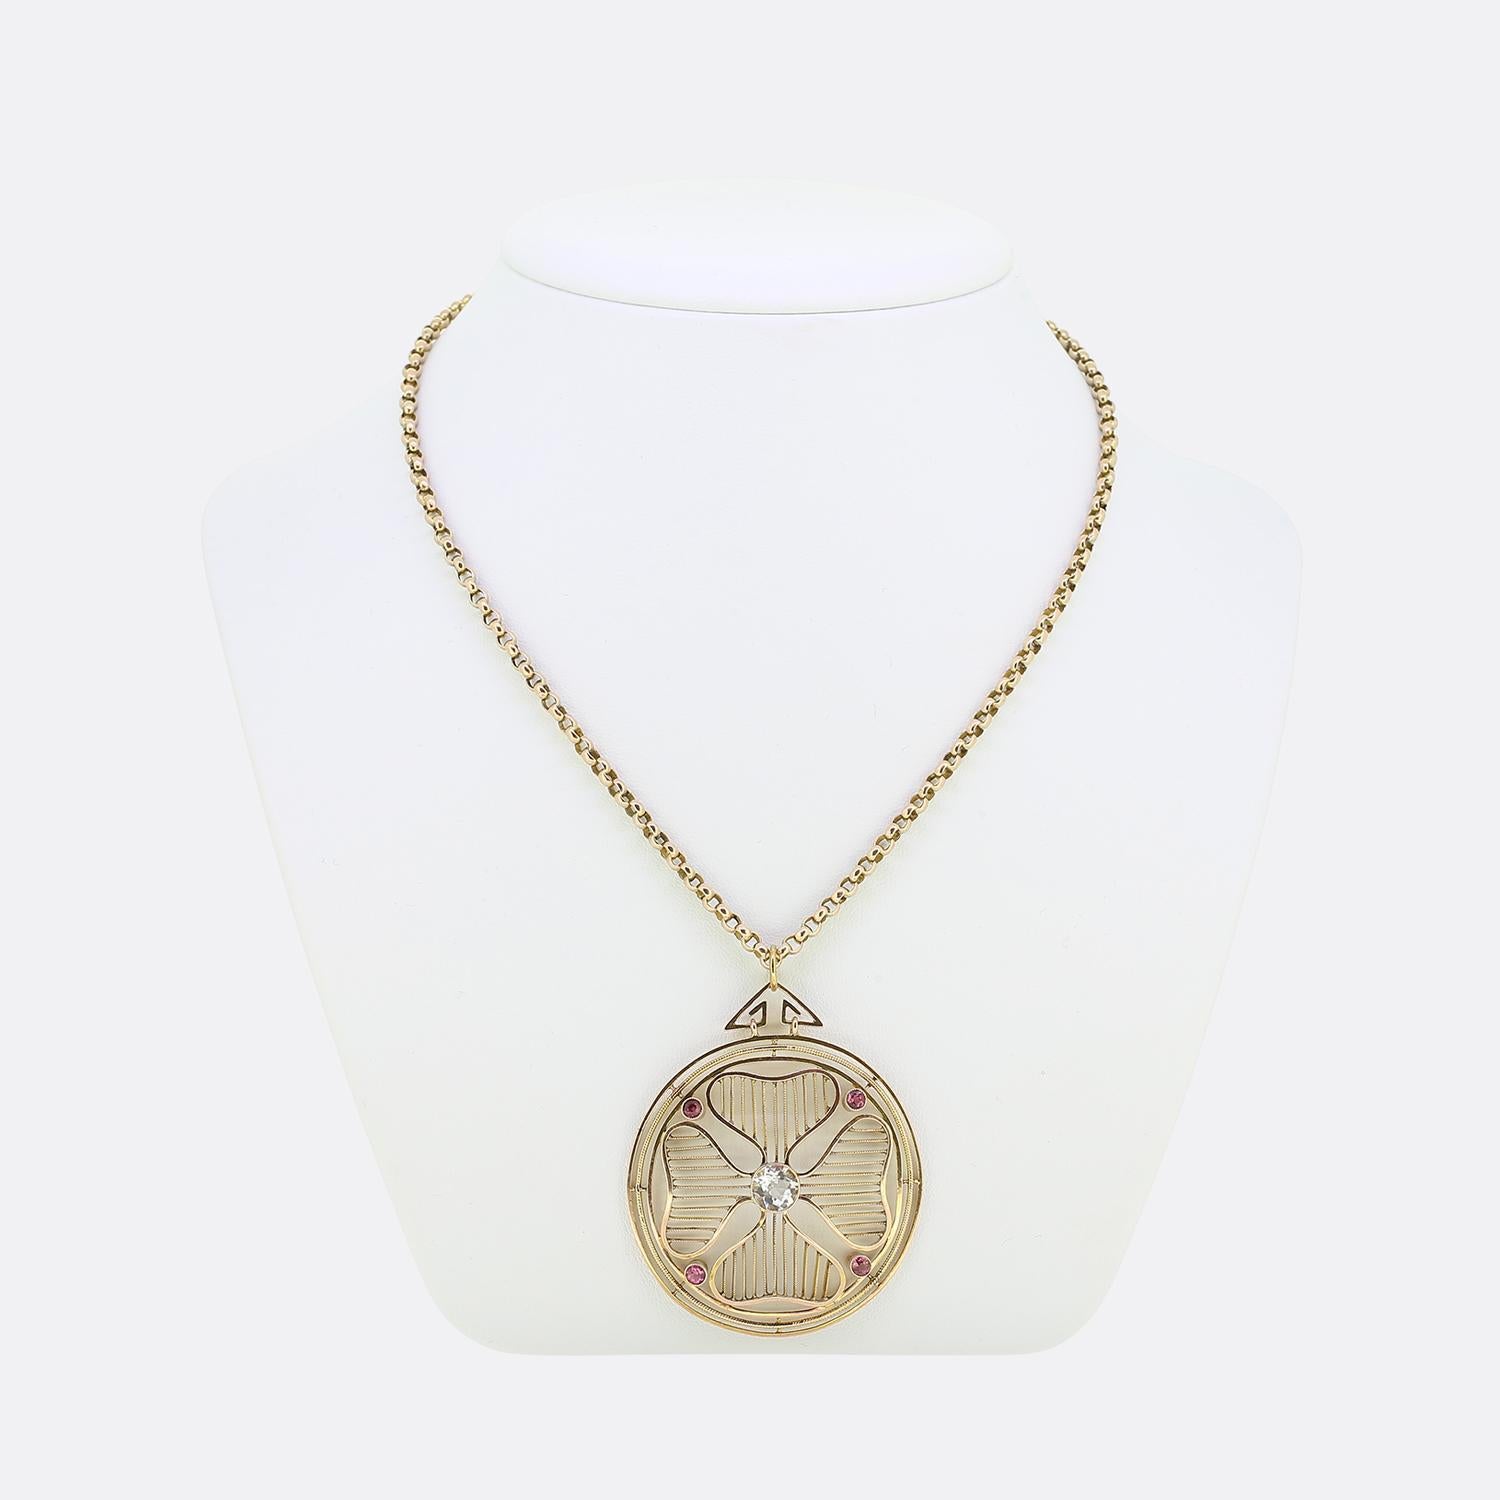 Here we have a wonderful antique pendant necklace. The pendant has been crafted from 9ct yellow gold into an circular shape and showcases a trio of borders around the outer edge consisting of both polished and roped finishes. Contained within is an